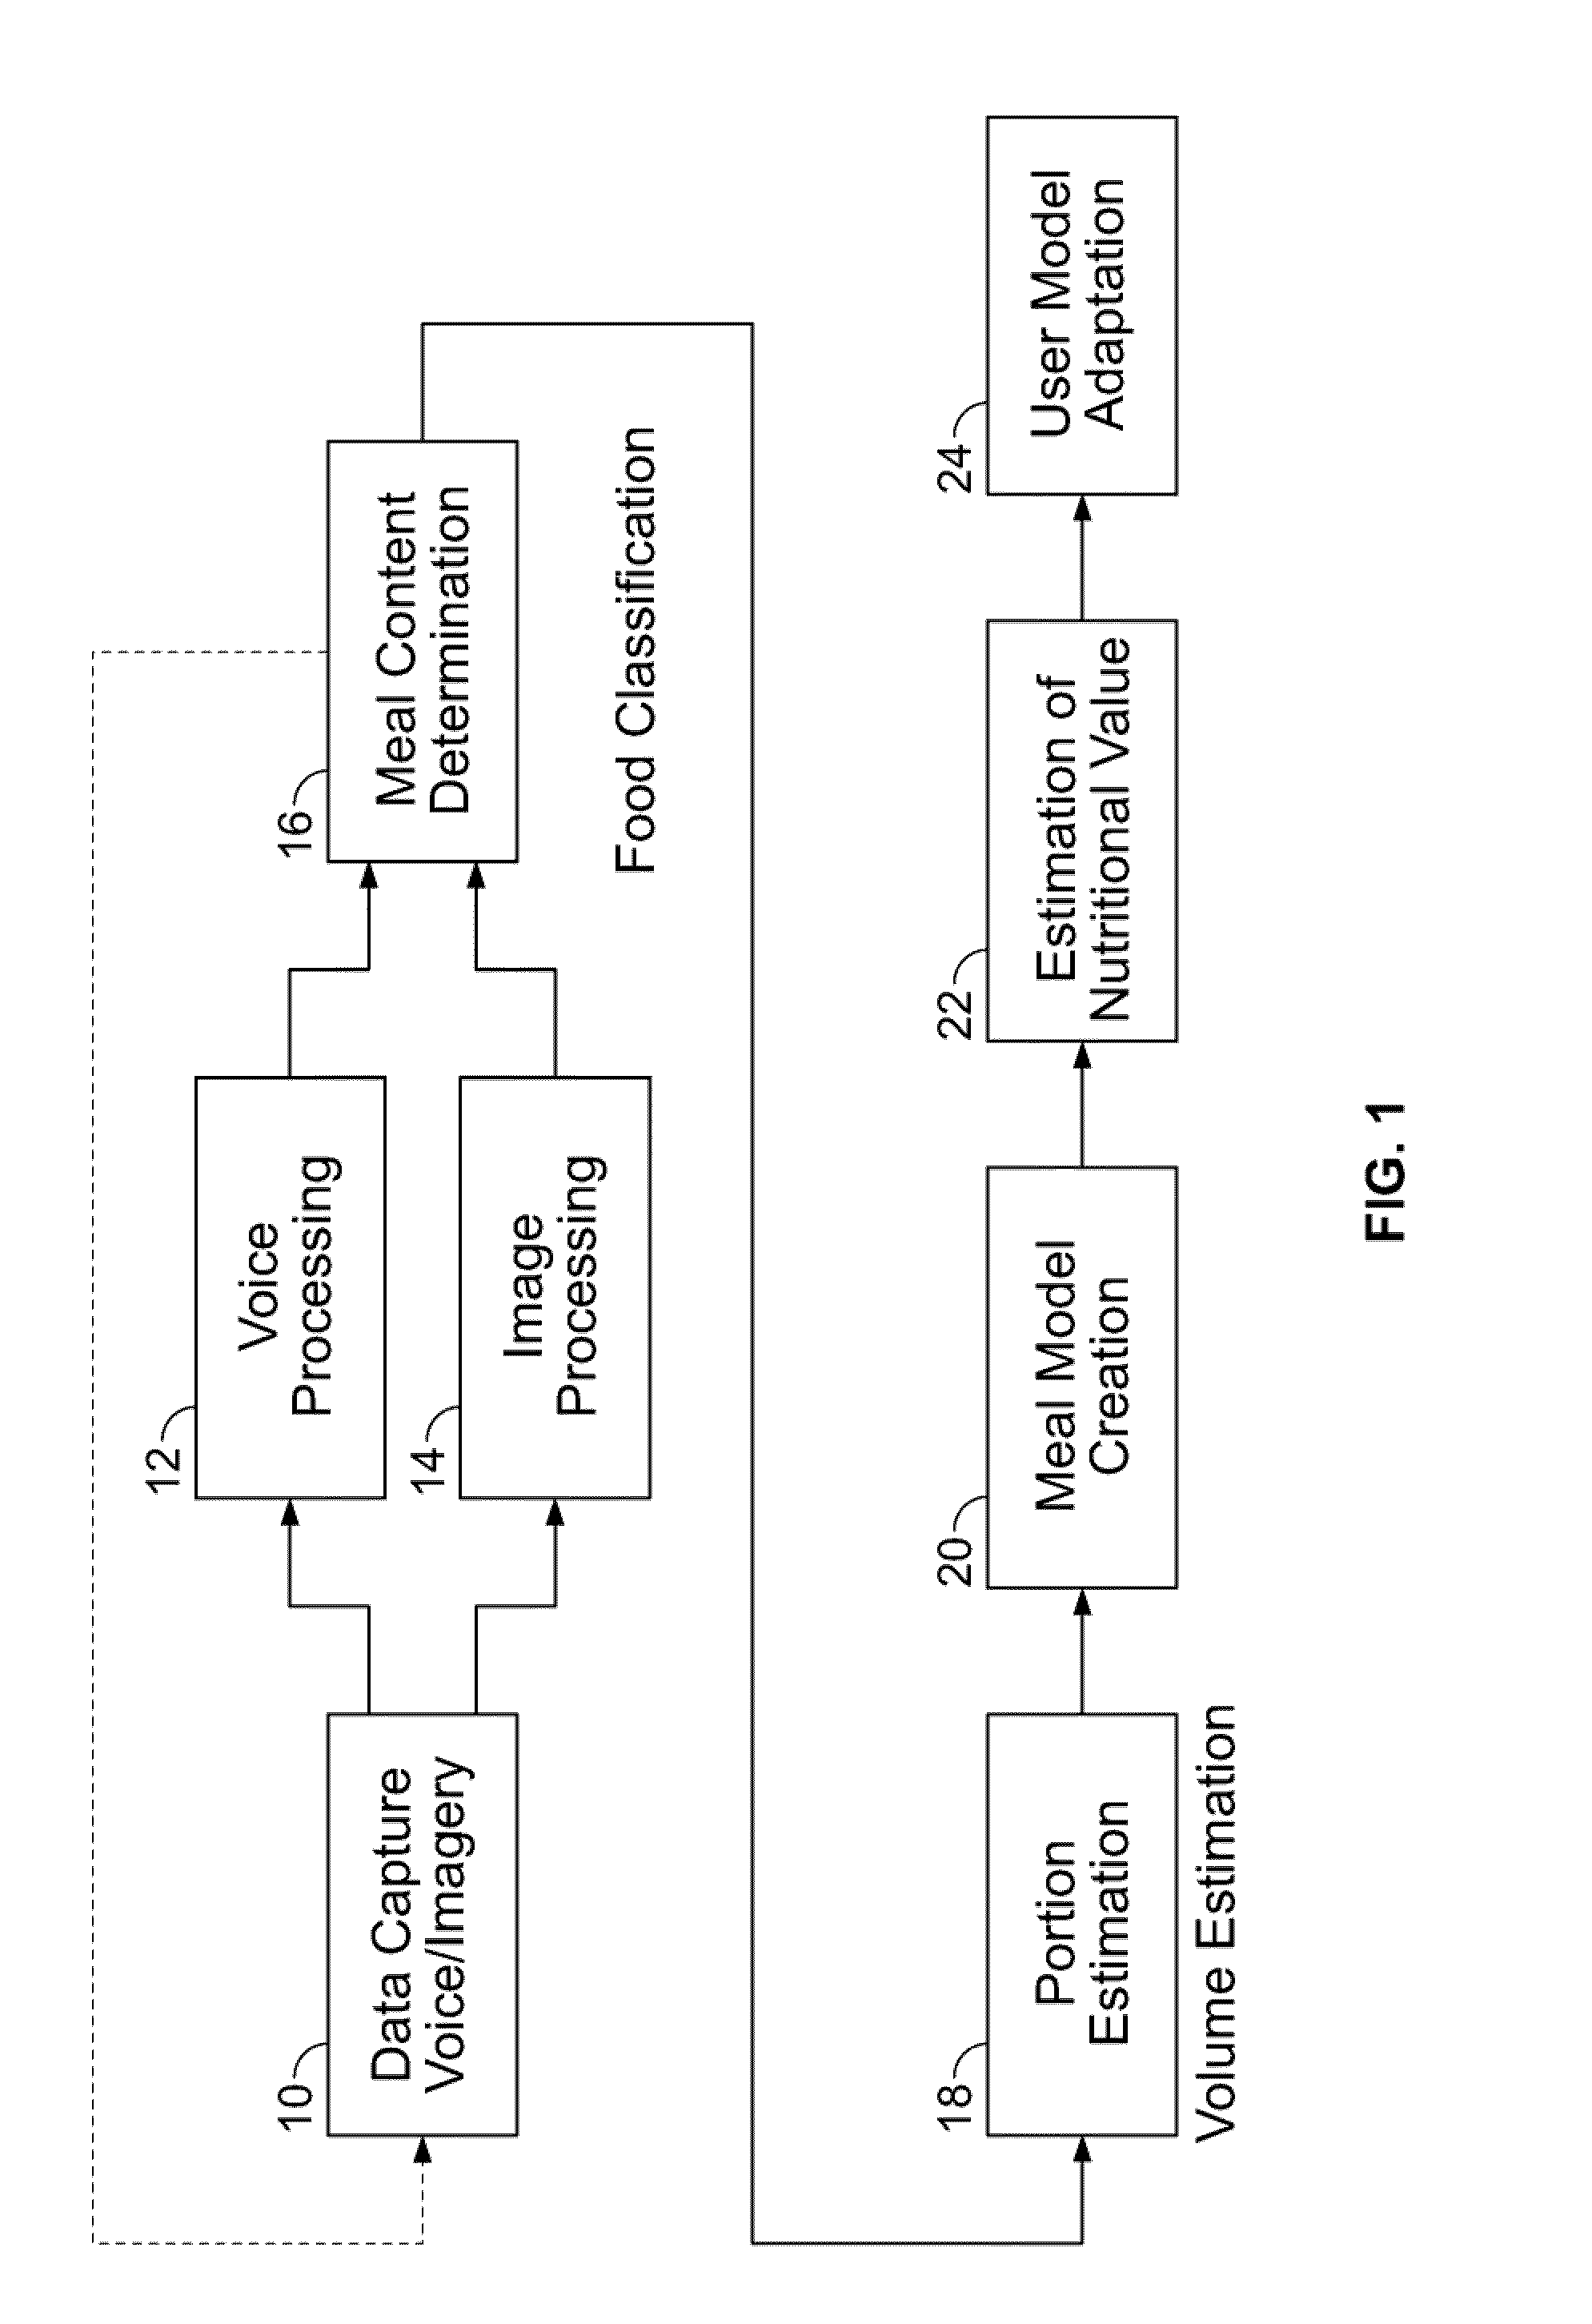 Food recognition using visual analysis and speech recognition